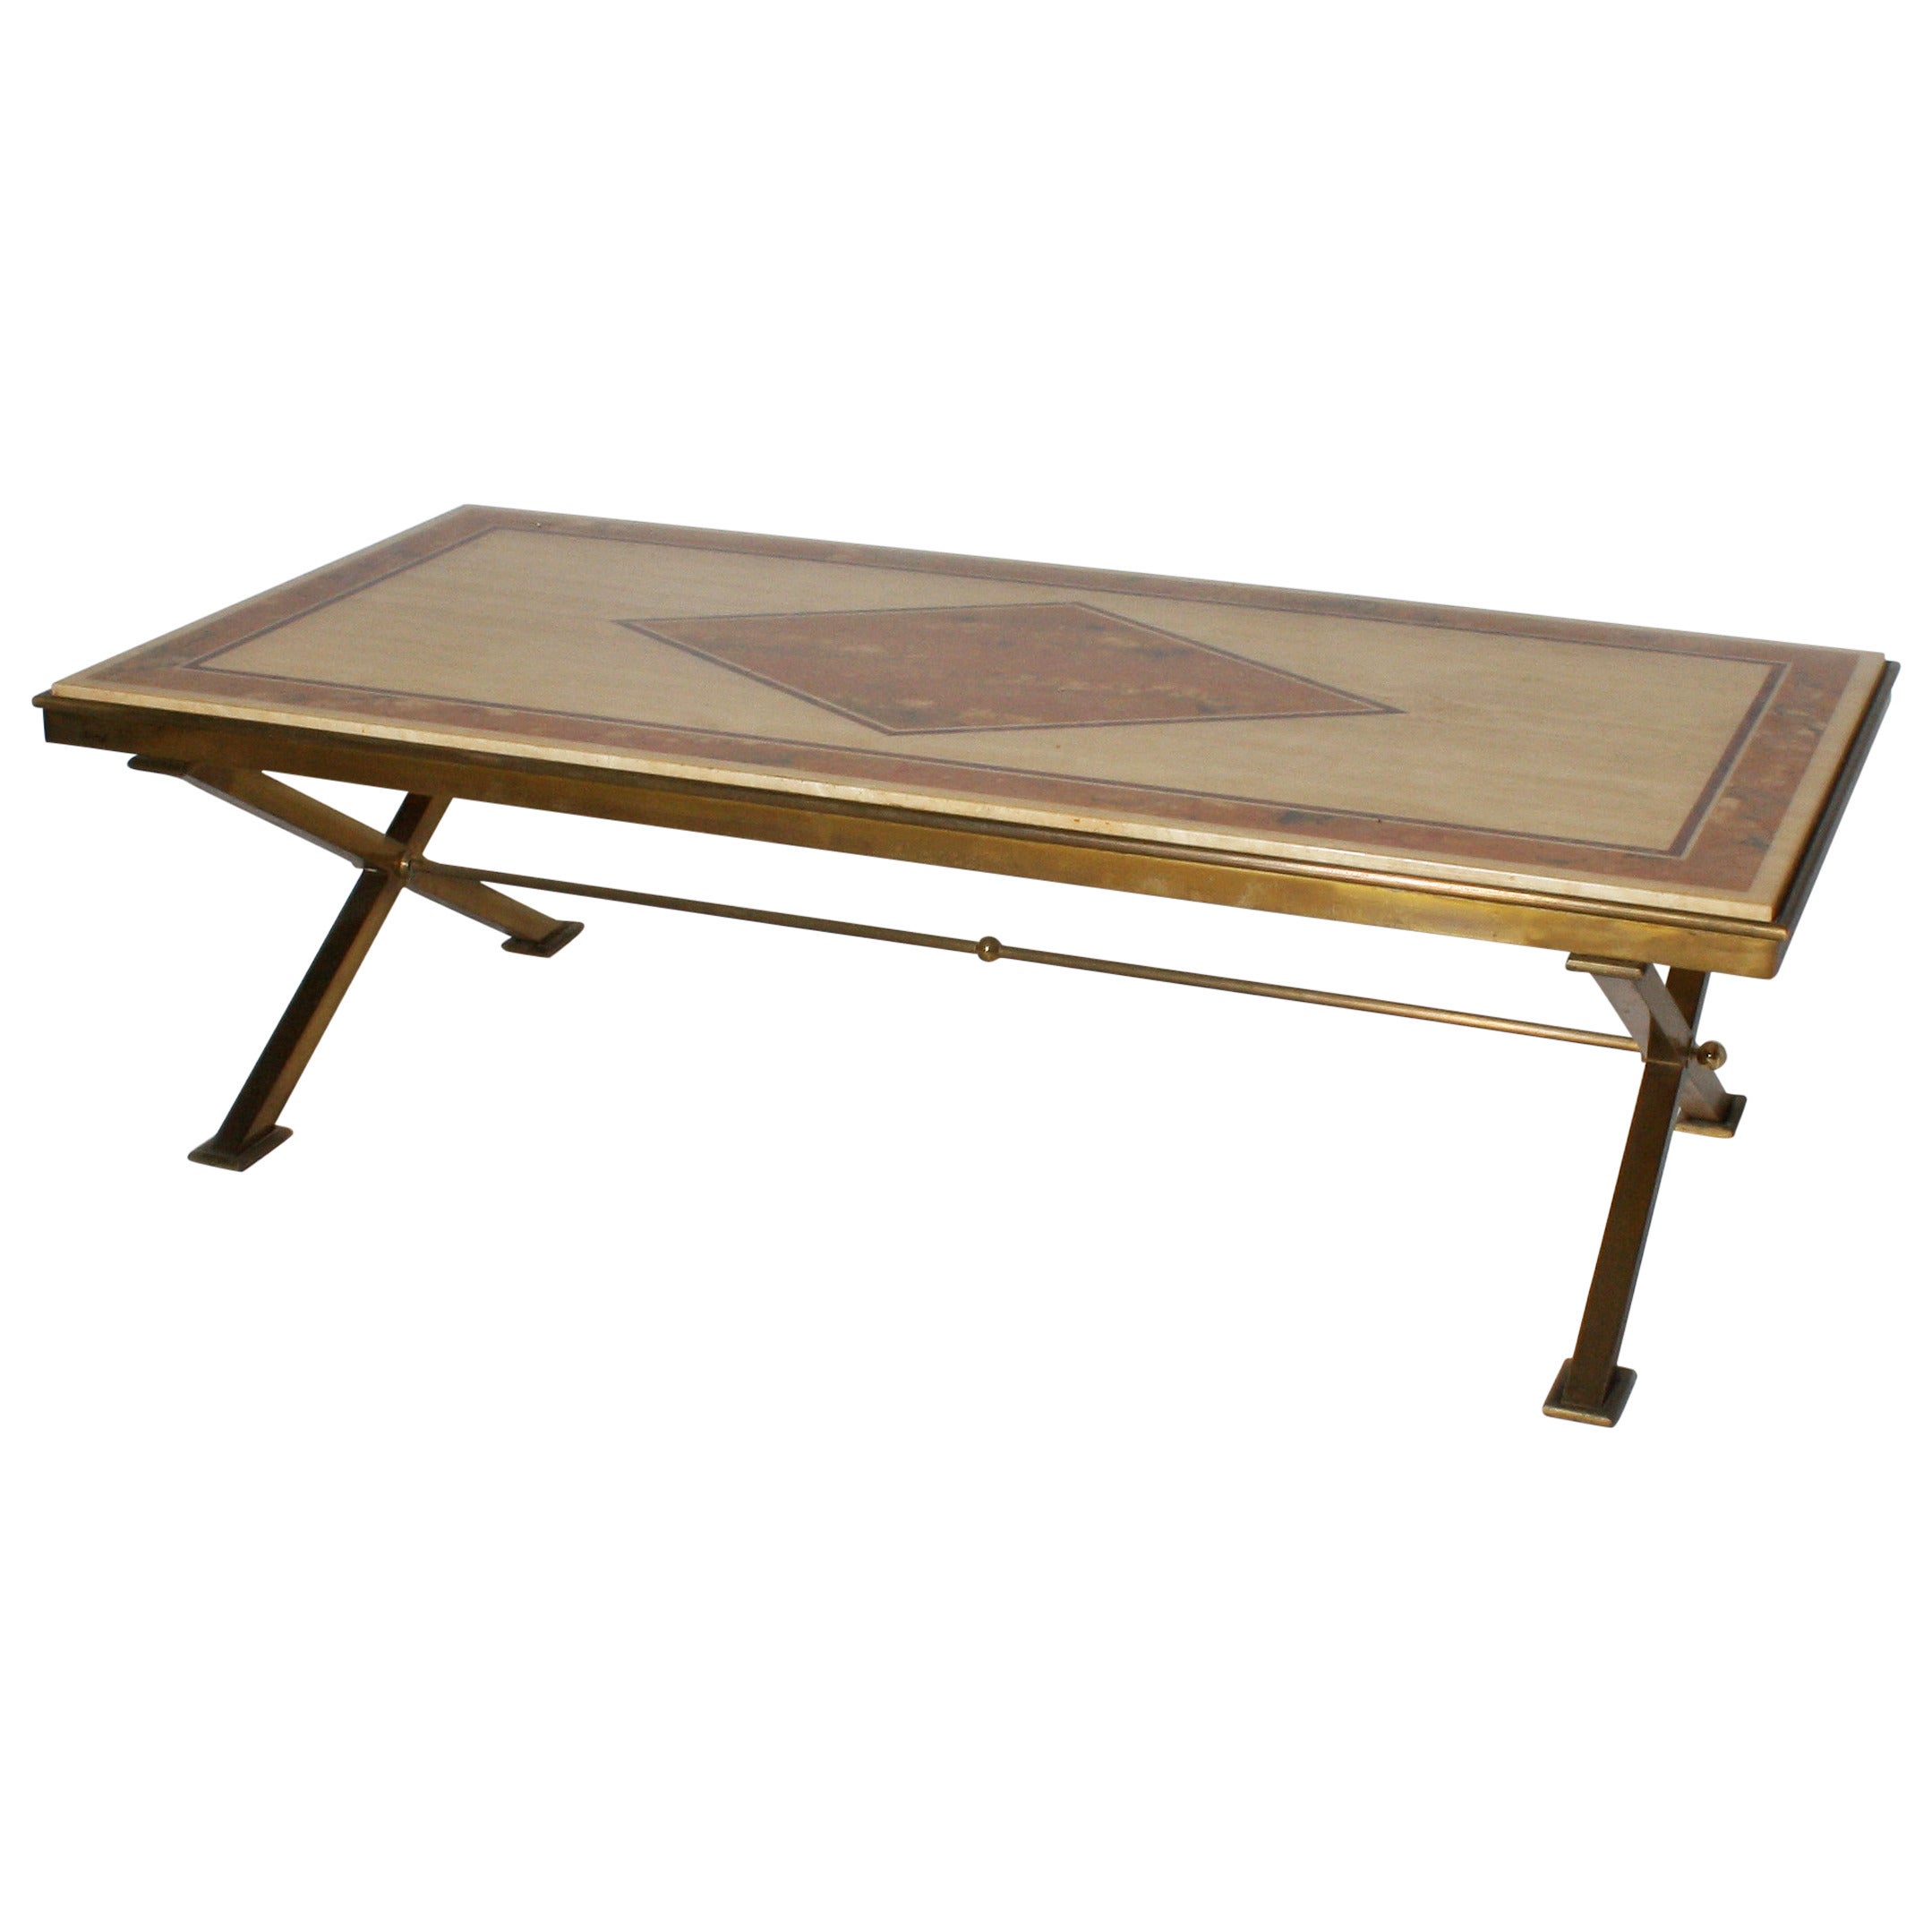 1950s Bronze X-Base Coffee Table with Travertine-Top and Faux Marble by Jansen